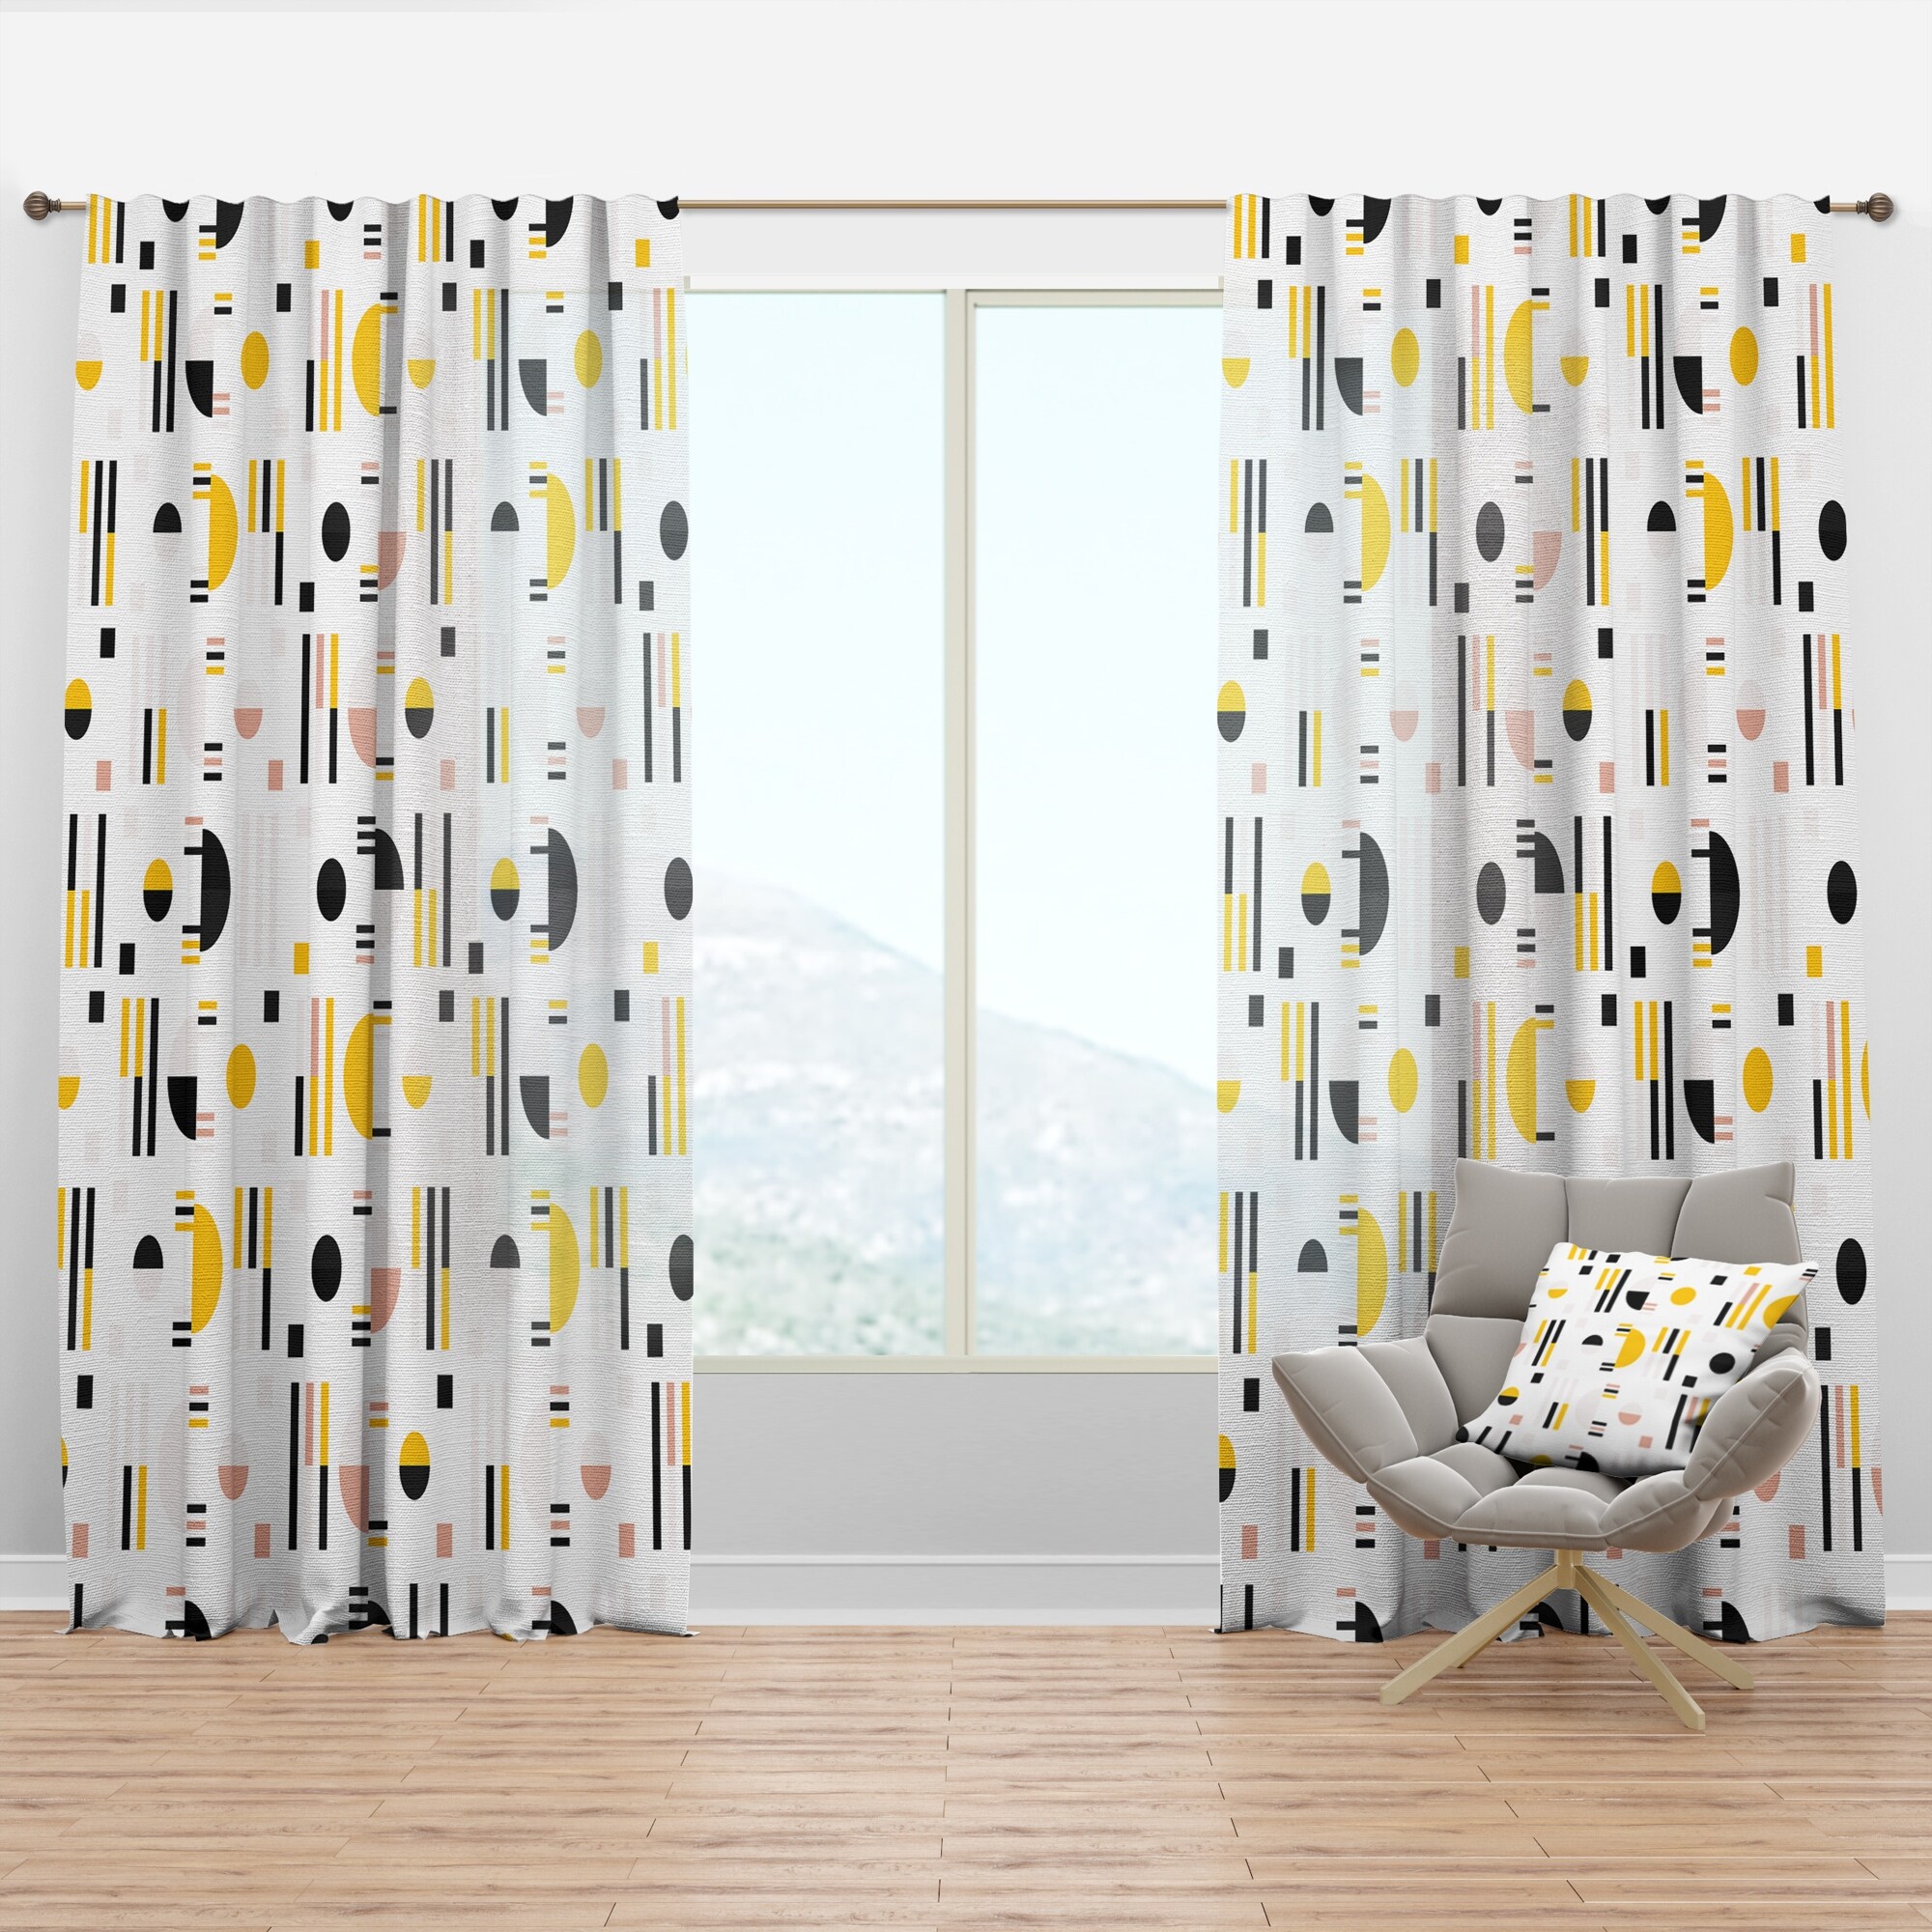 Geometric Custom Curtain Panel by Spoonflower Atomic Ovals Blue by speakeasyworks Mid Century Modern Curtain Panel